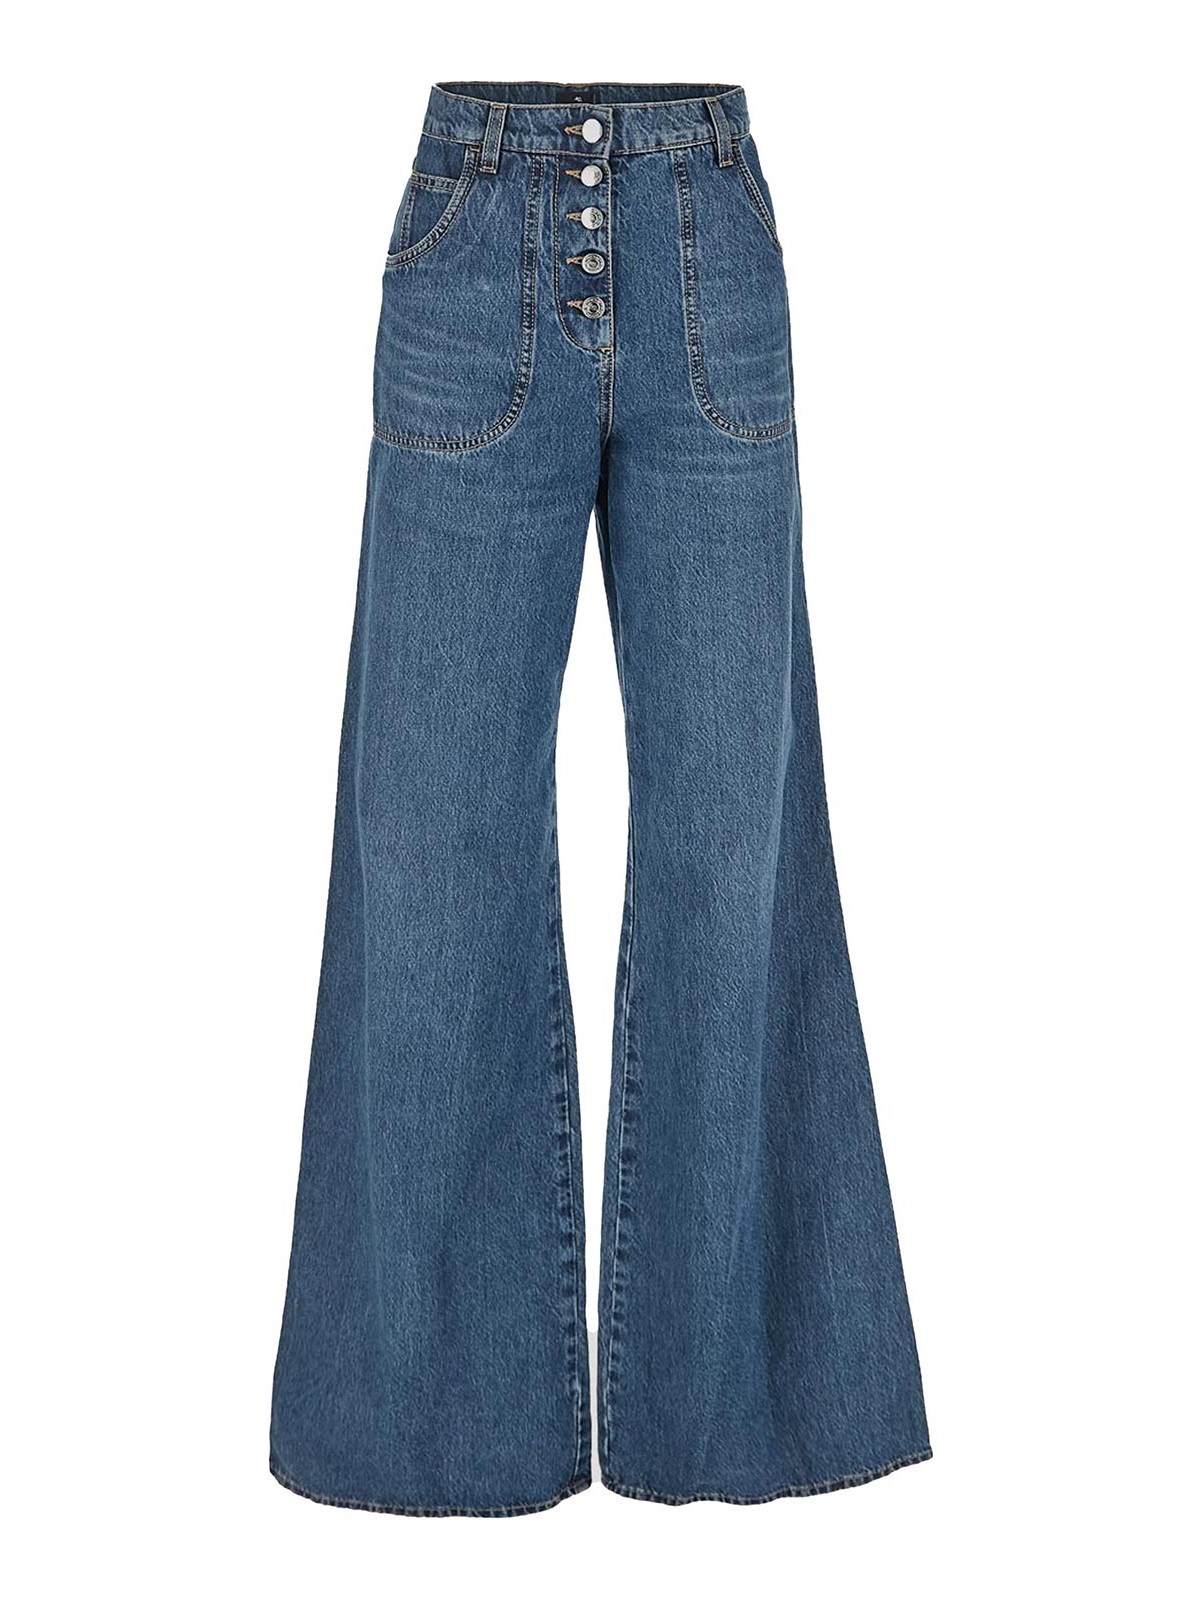 Etro Boootcut Jeans In Light Wash